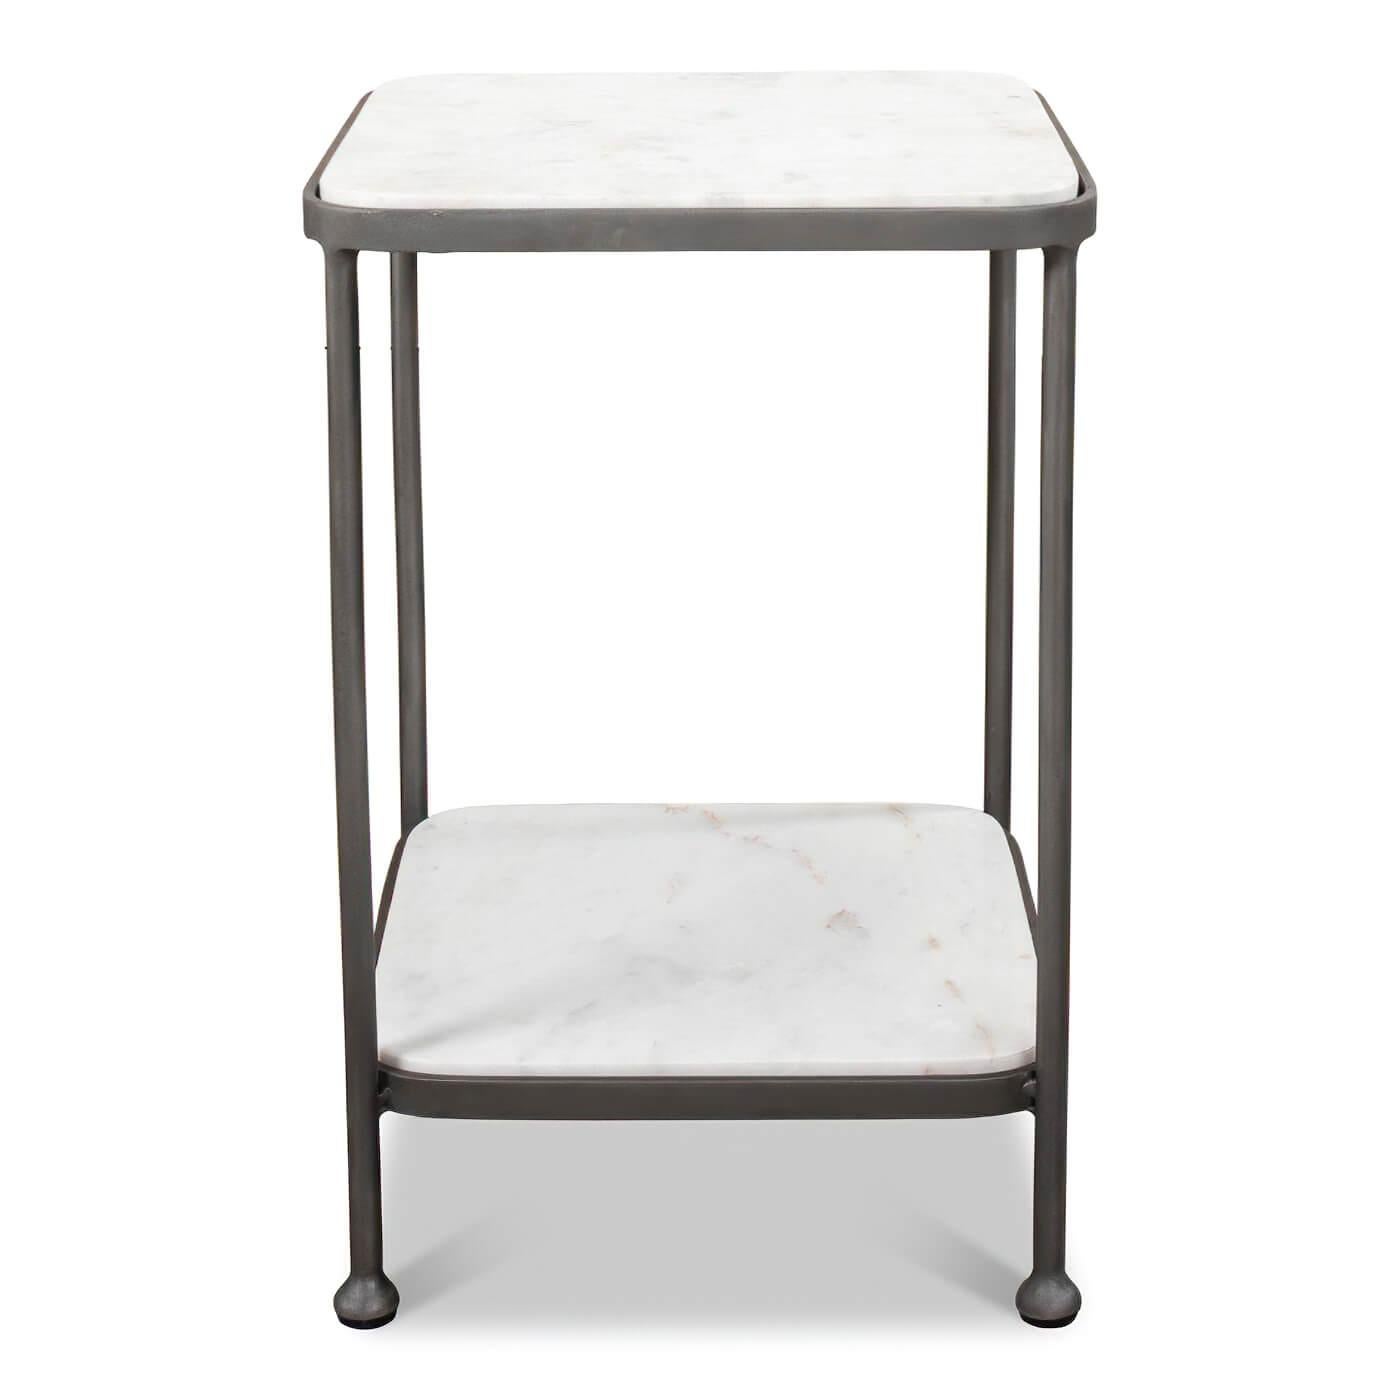 This side table features a gunmetal finish frame with a Banswara white marble top and lower shelf. 

Dimensions: 15